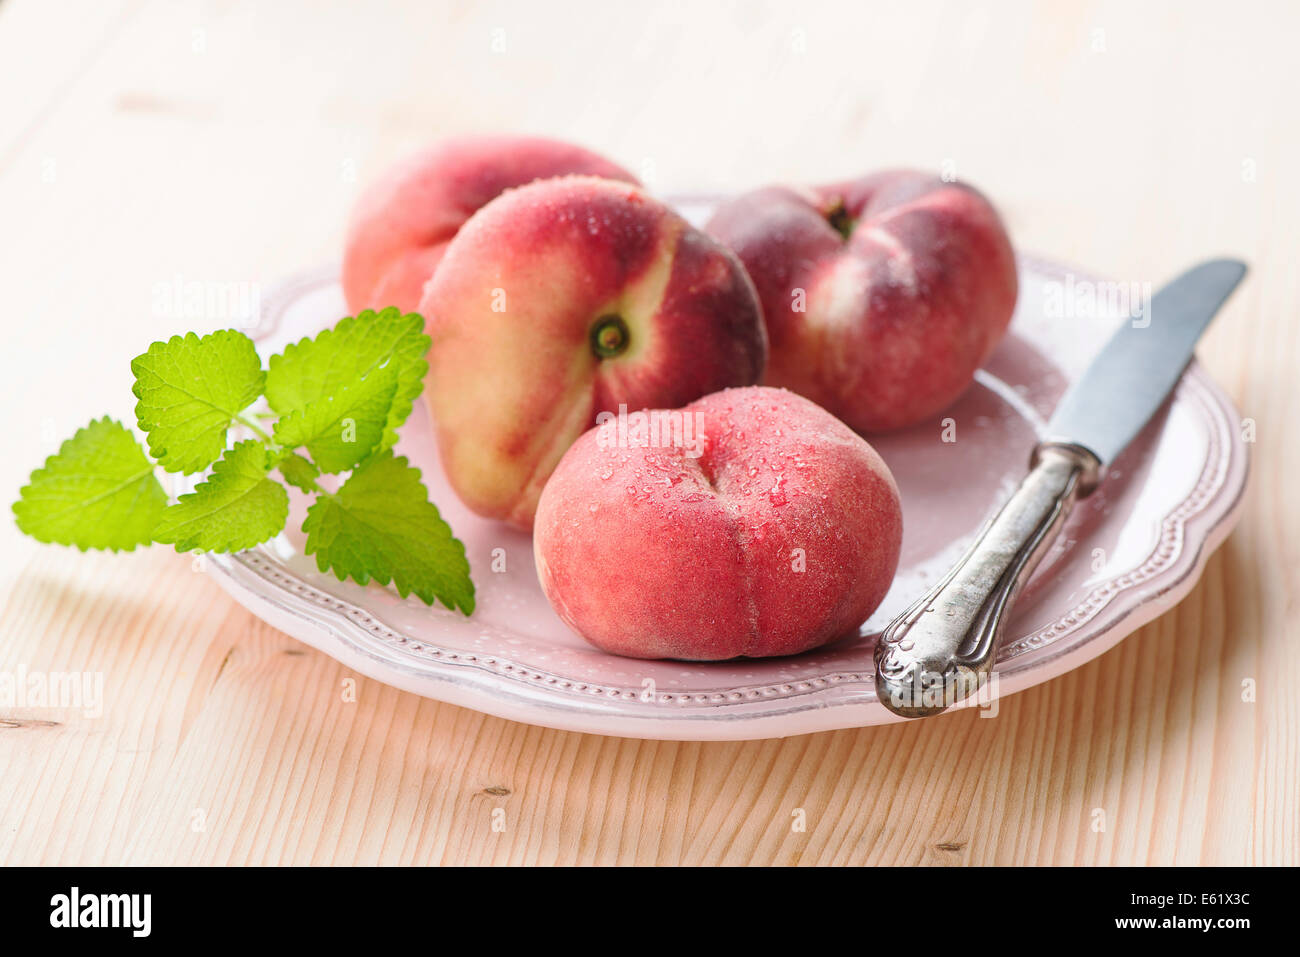 Ripe juicy chinese flat peaches (also called Saturn peaches) Stock Photo